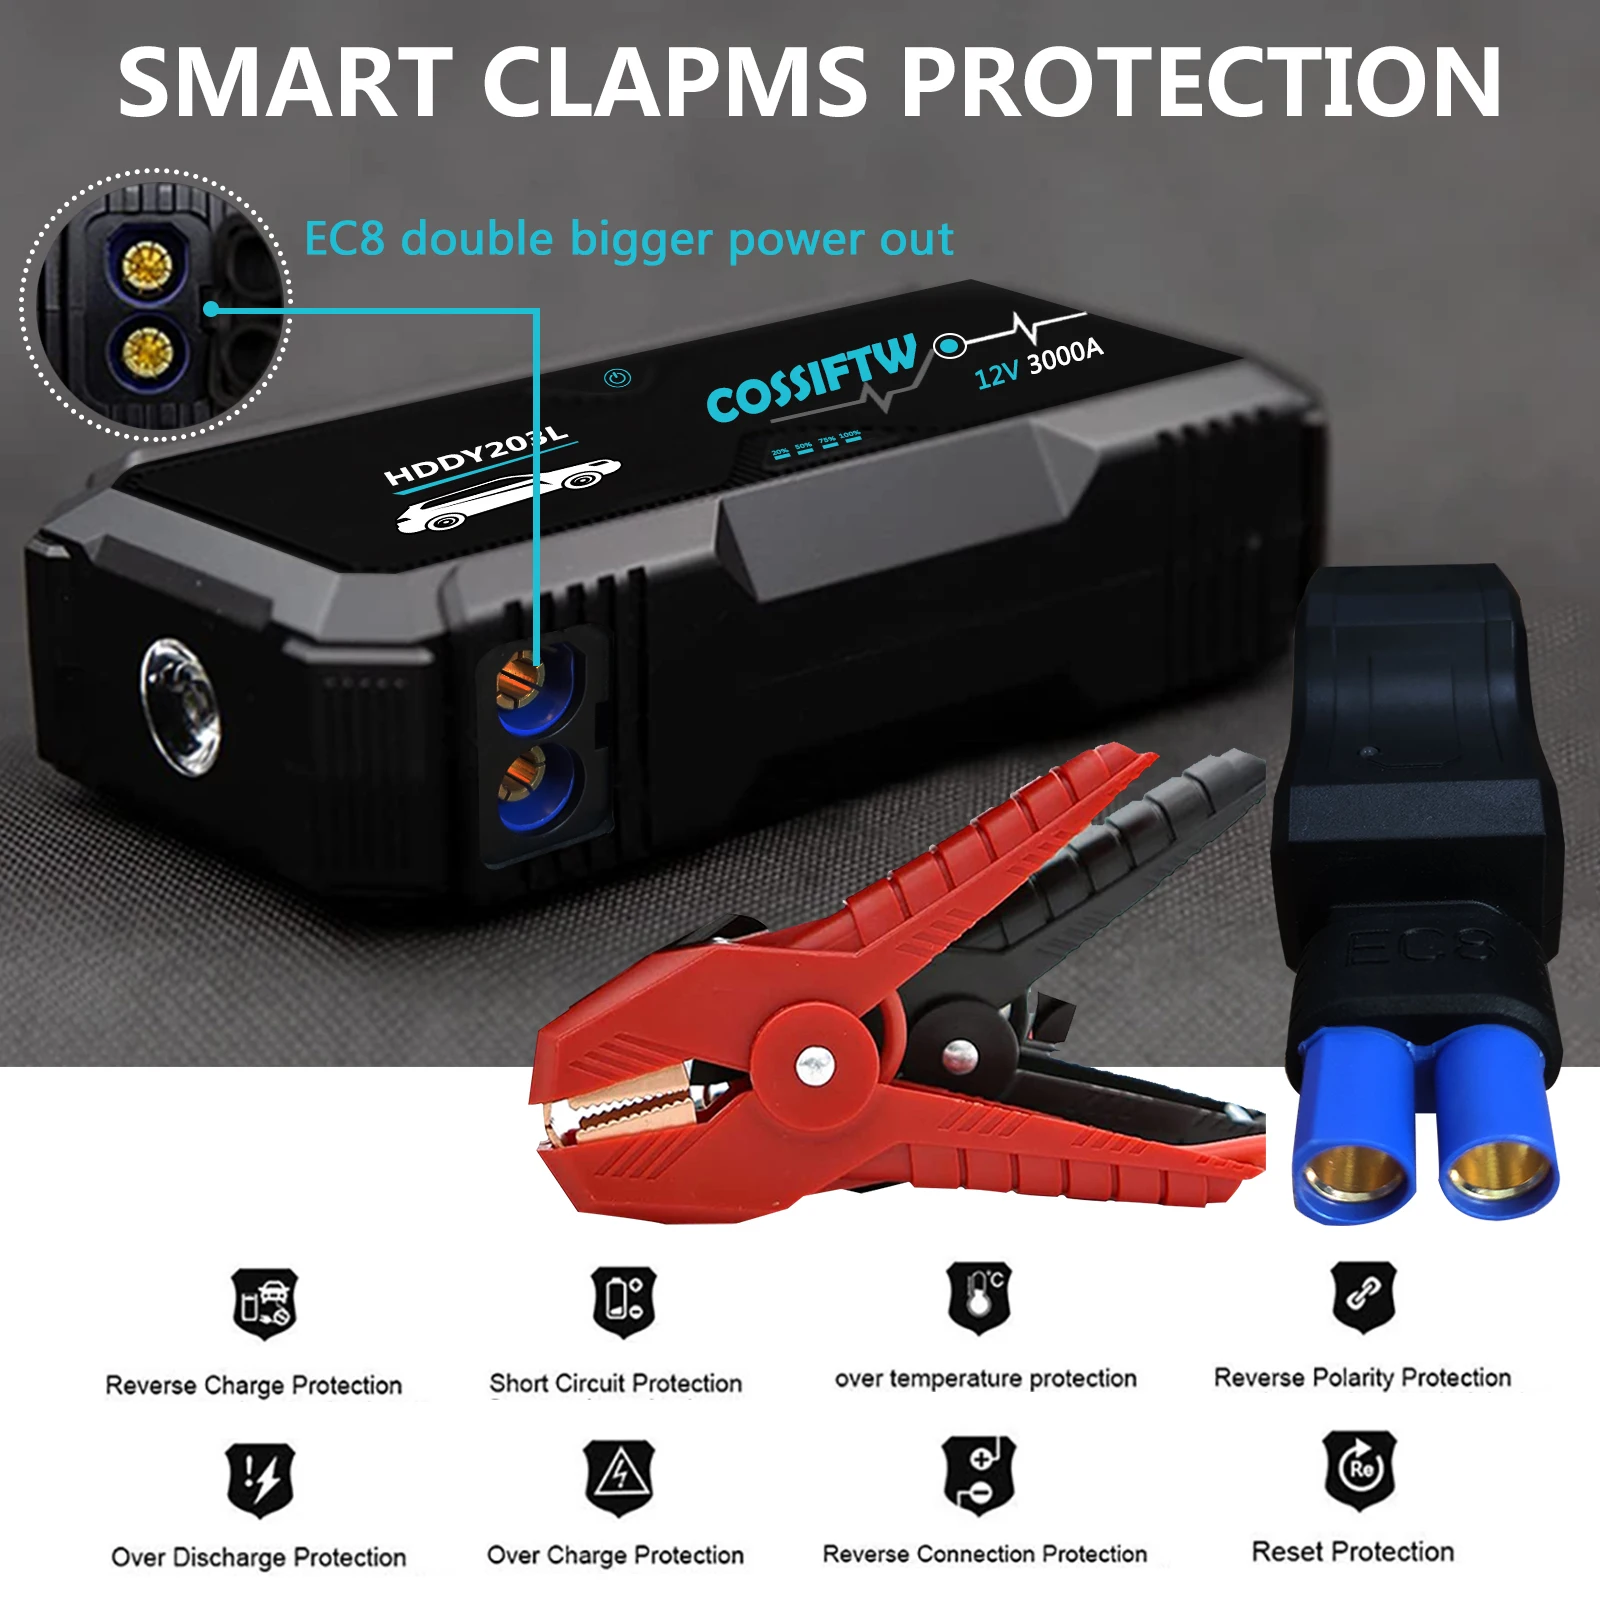 

COSSIFTW OEM ODM customized 12V 3000A High Quality Multi-function Car Jump Starter with PD laptop charging EC8